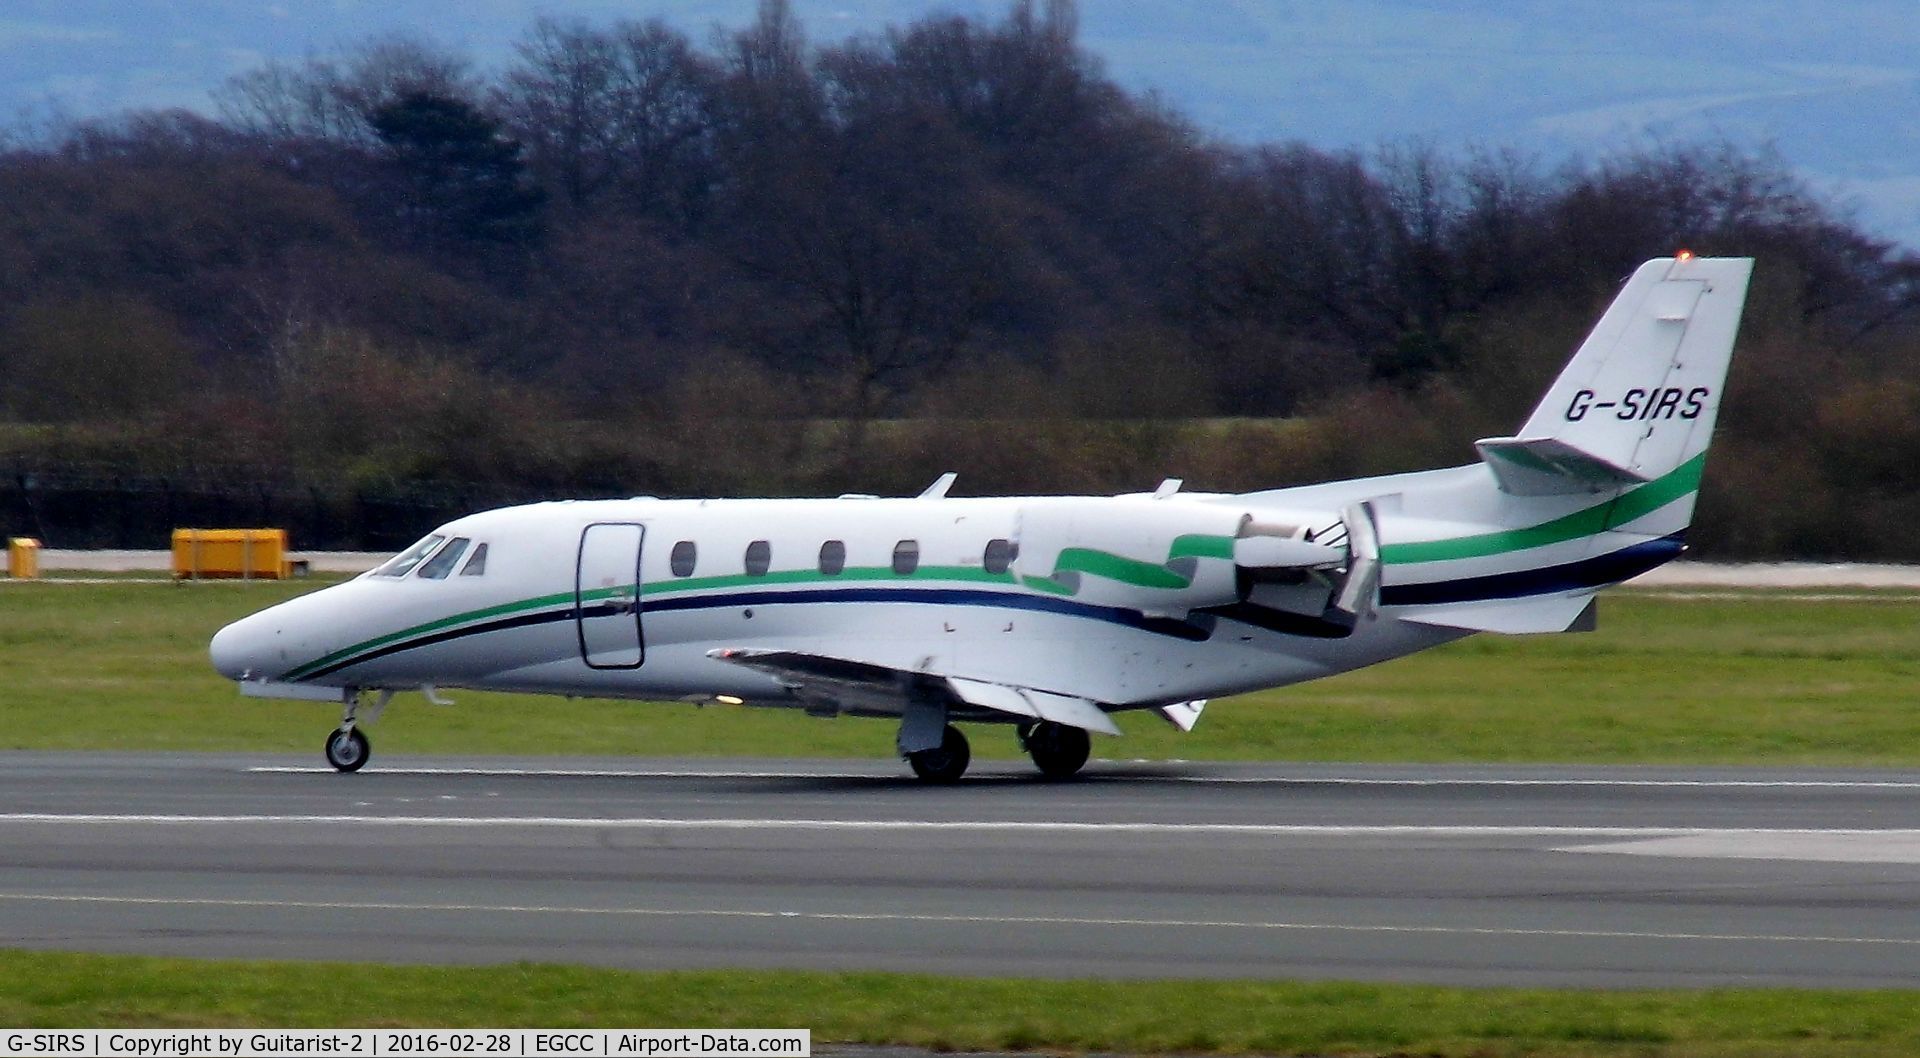 G-SIRS, 2001 Cessna 560XL Citation Excel C/N 560-5185, At Manchester